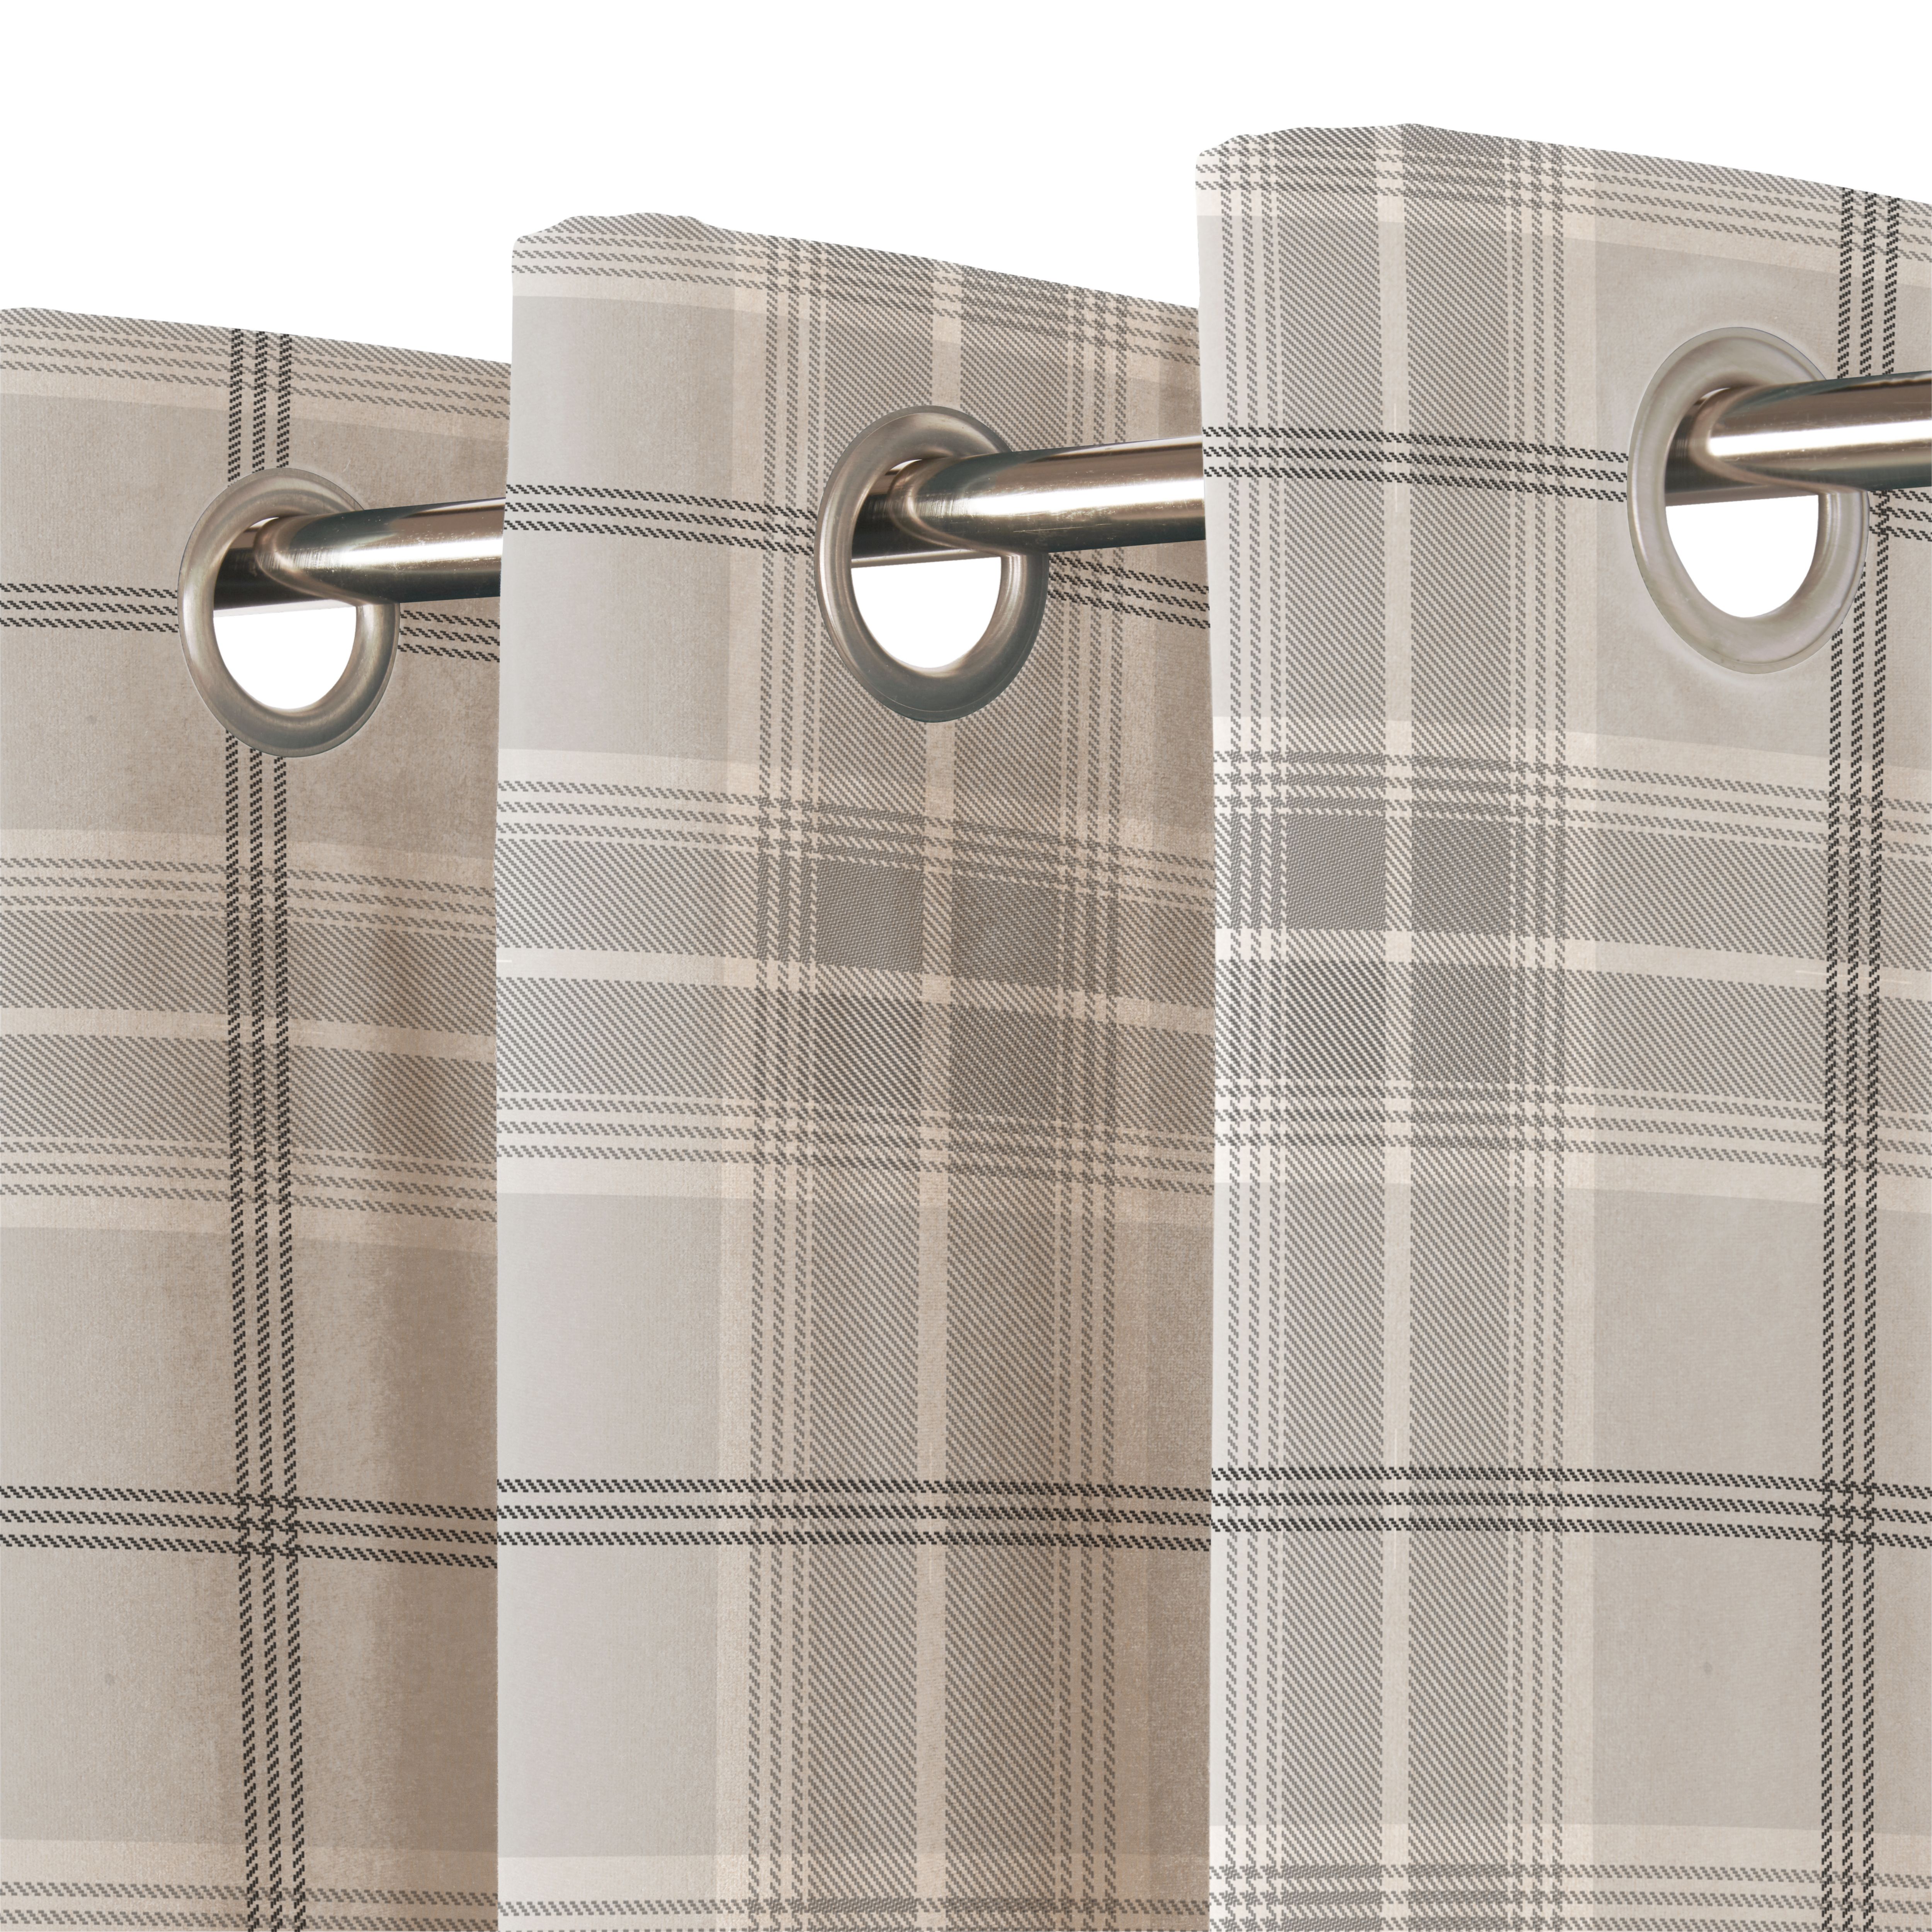 Podor Beige Check Lined Eyelet Curtain (W)167cm (L)183cm, Pair